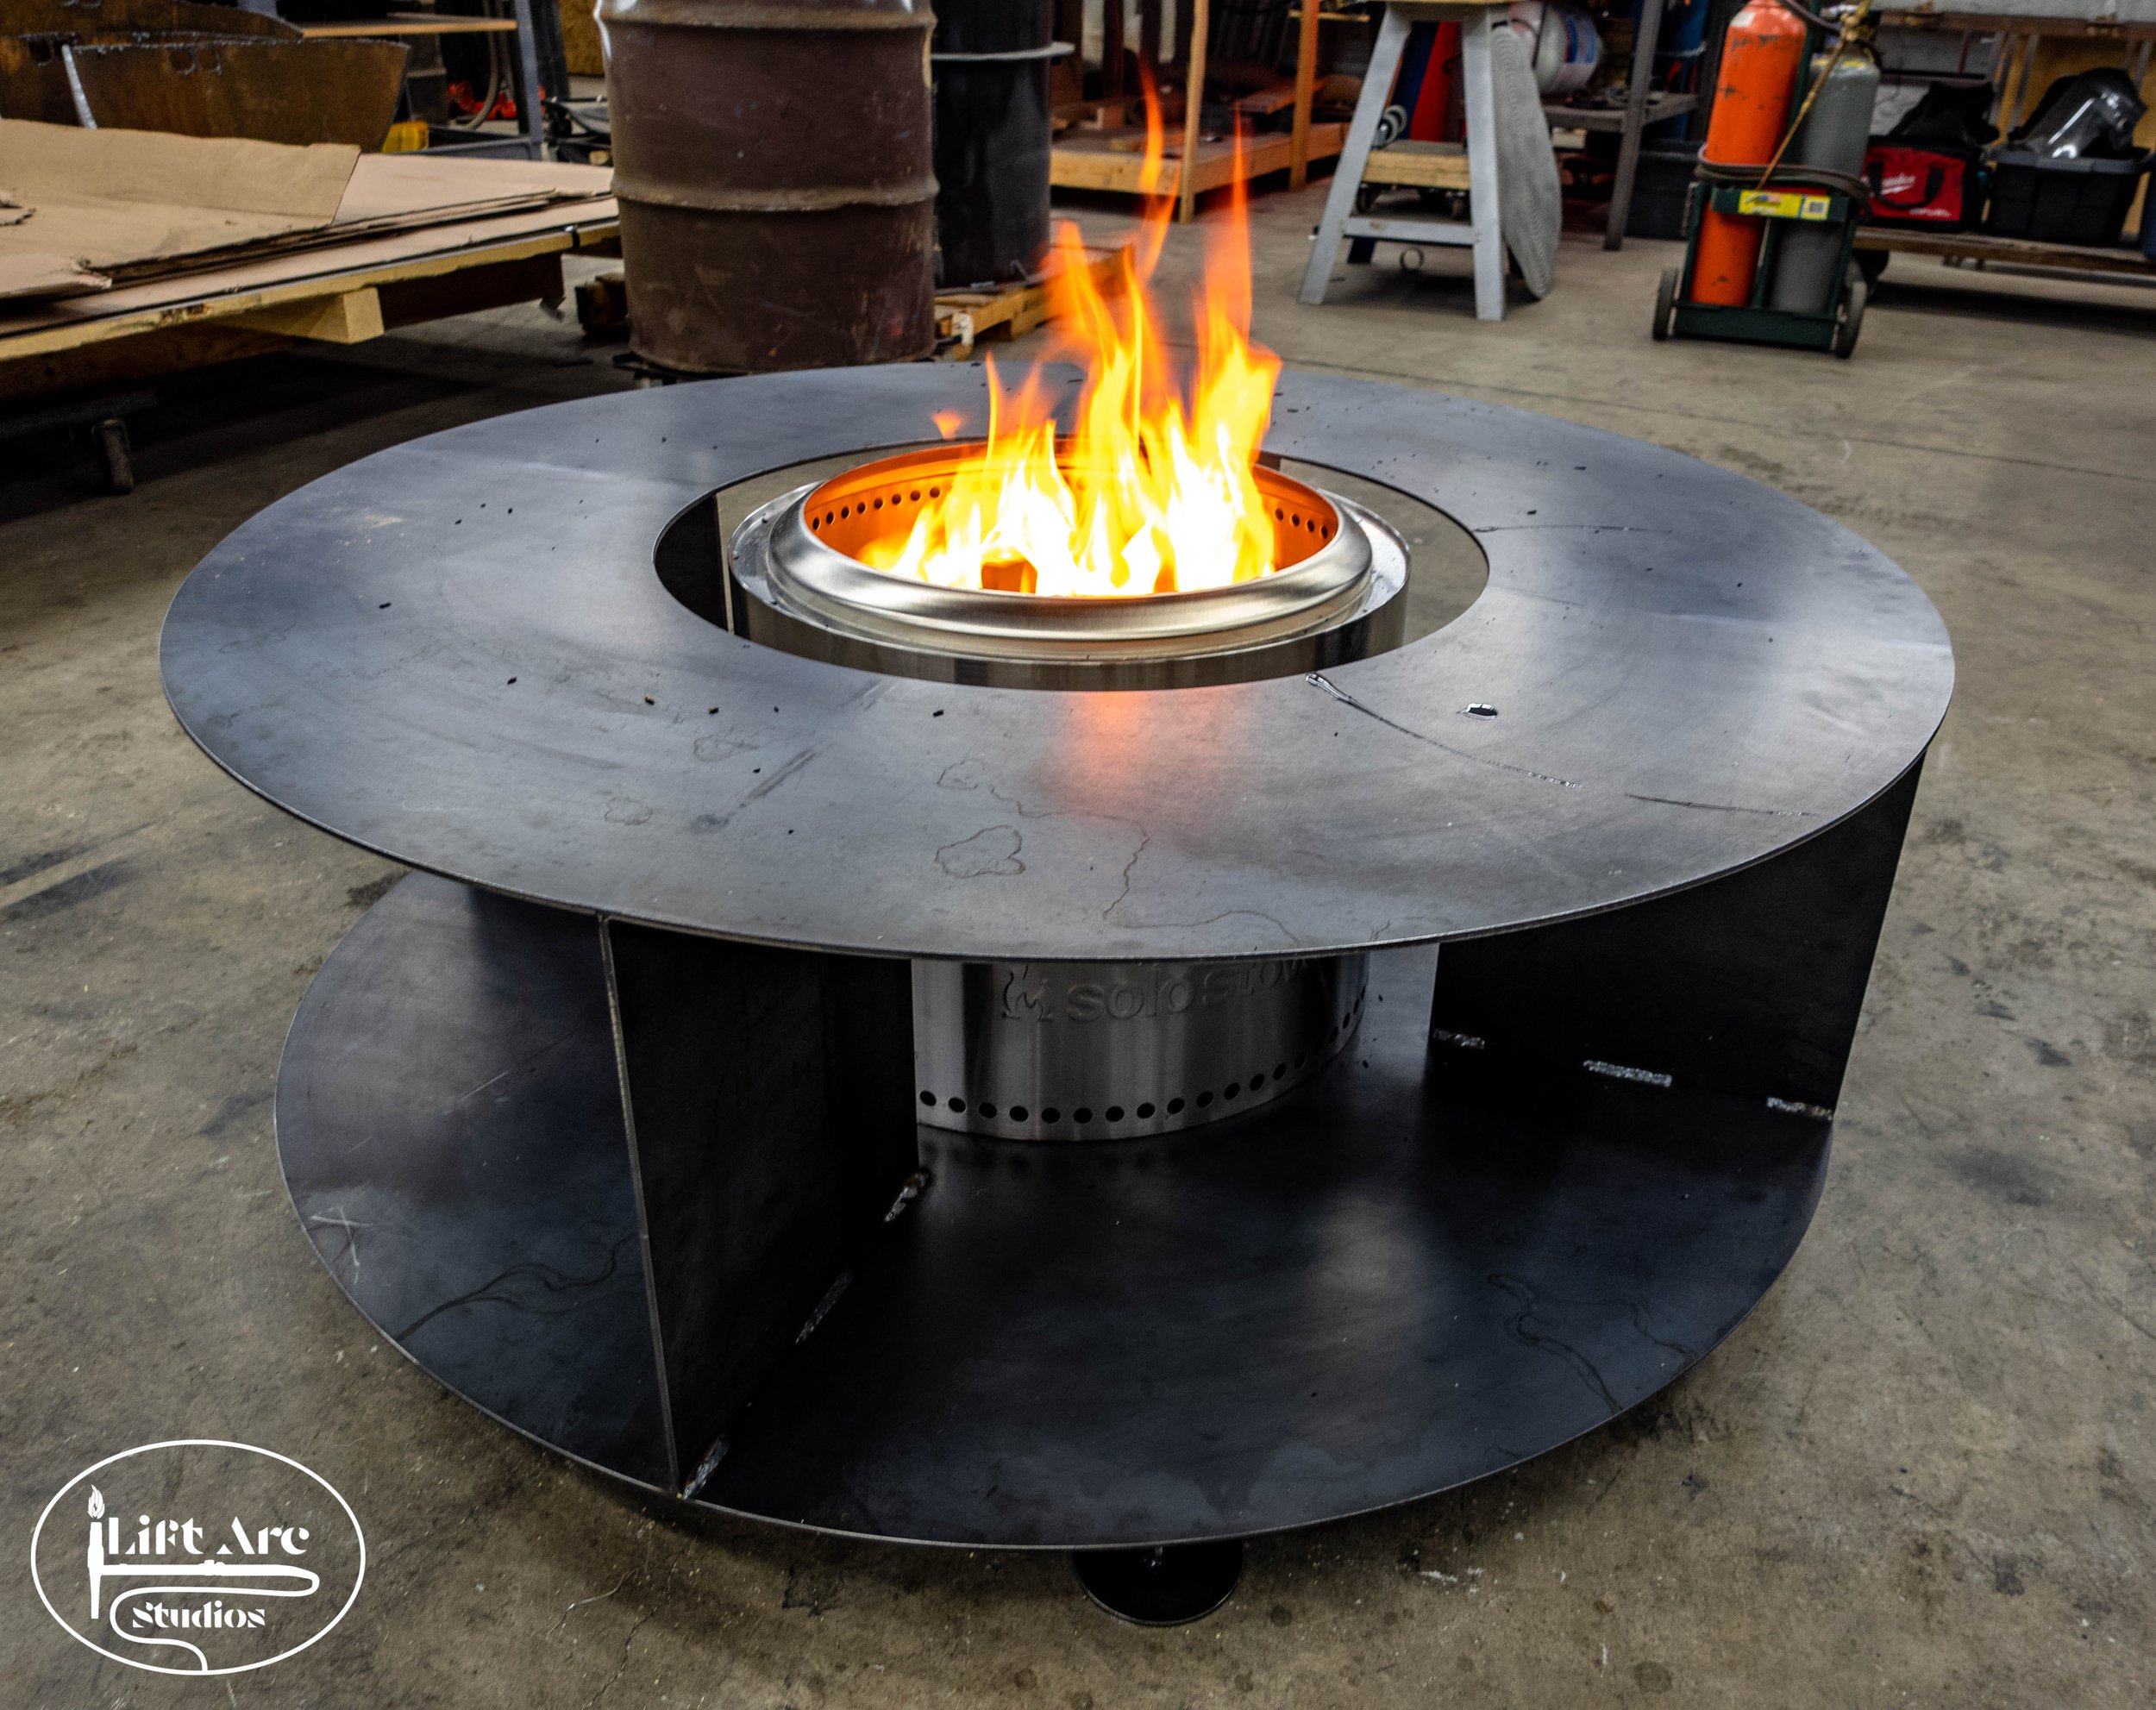 Solo Stove - Give this custom fire pit table build created by @ryan4ui⁠  (instagram) a like!